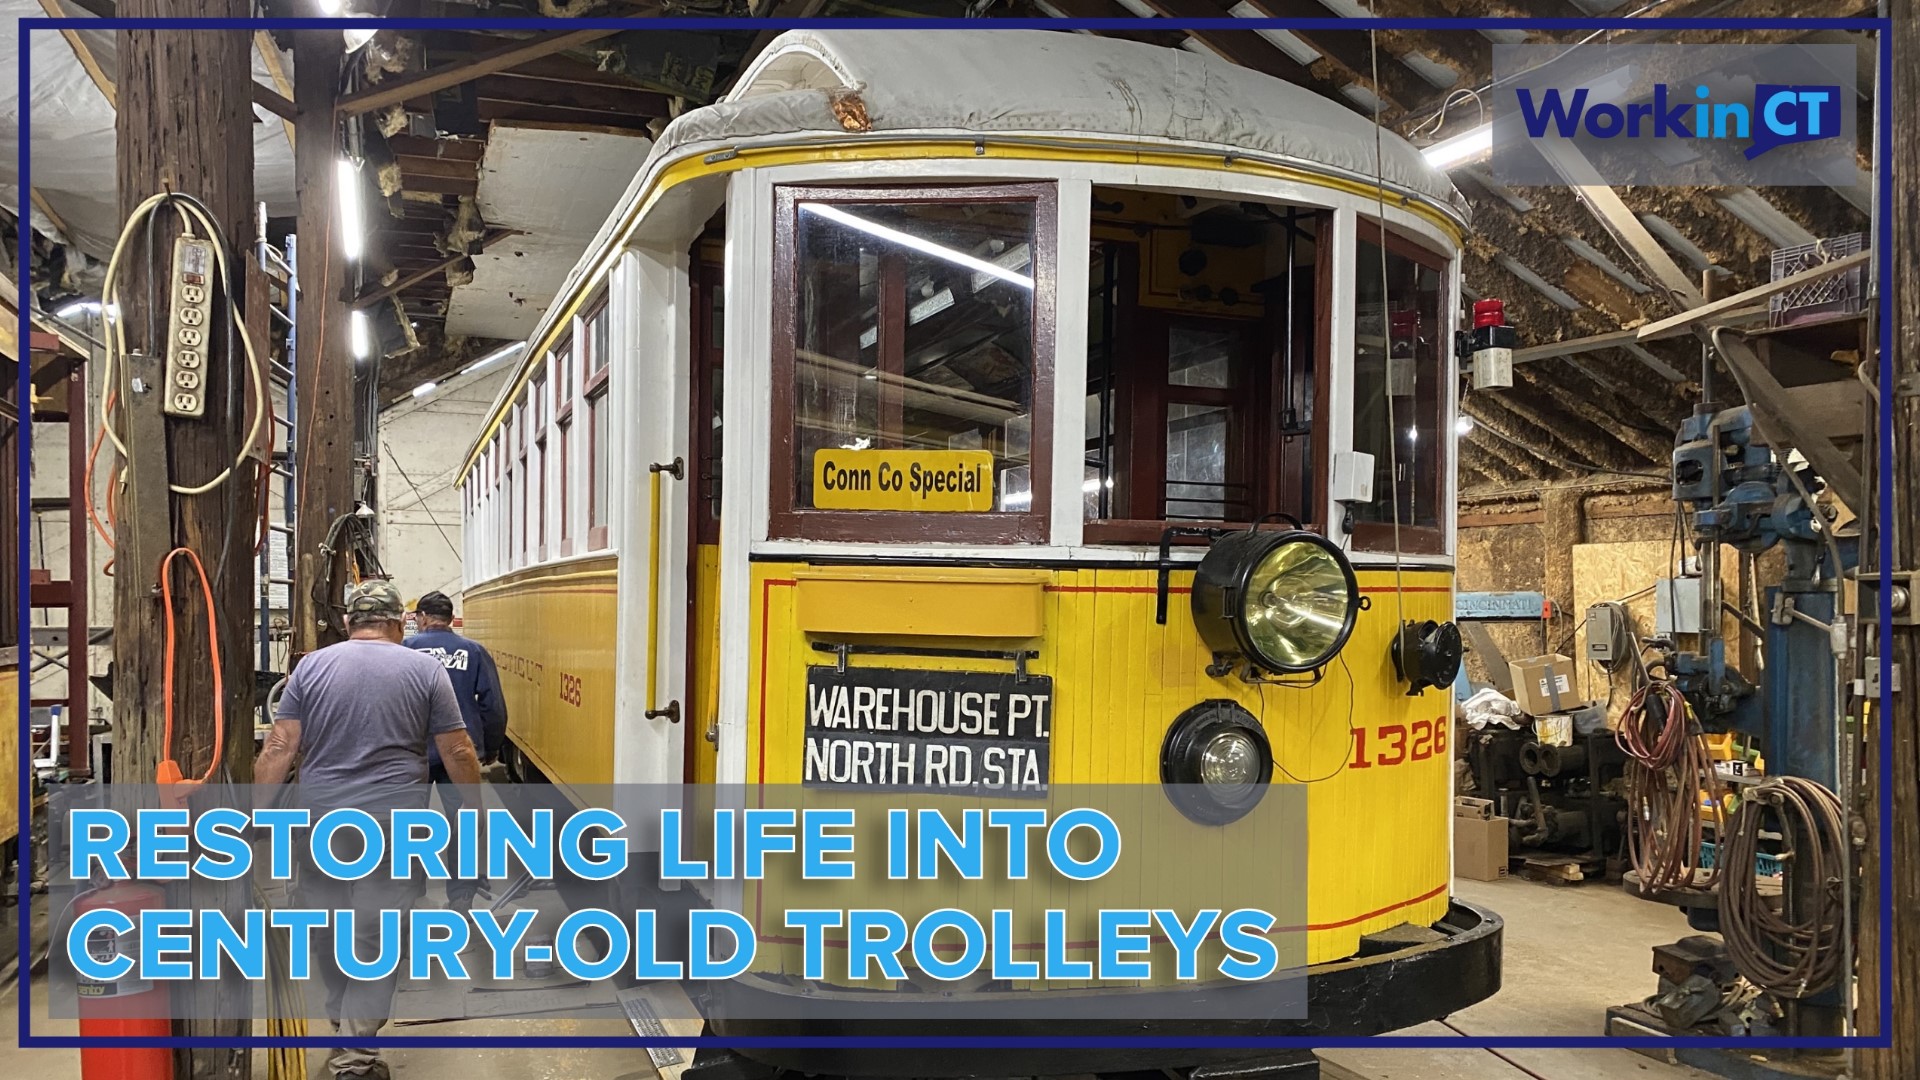 The Connecticut Trolley Museum is open on weekends during the Spring season. The museum goes six days a week beginning the third week of June.